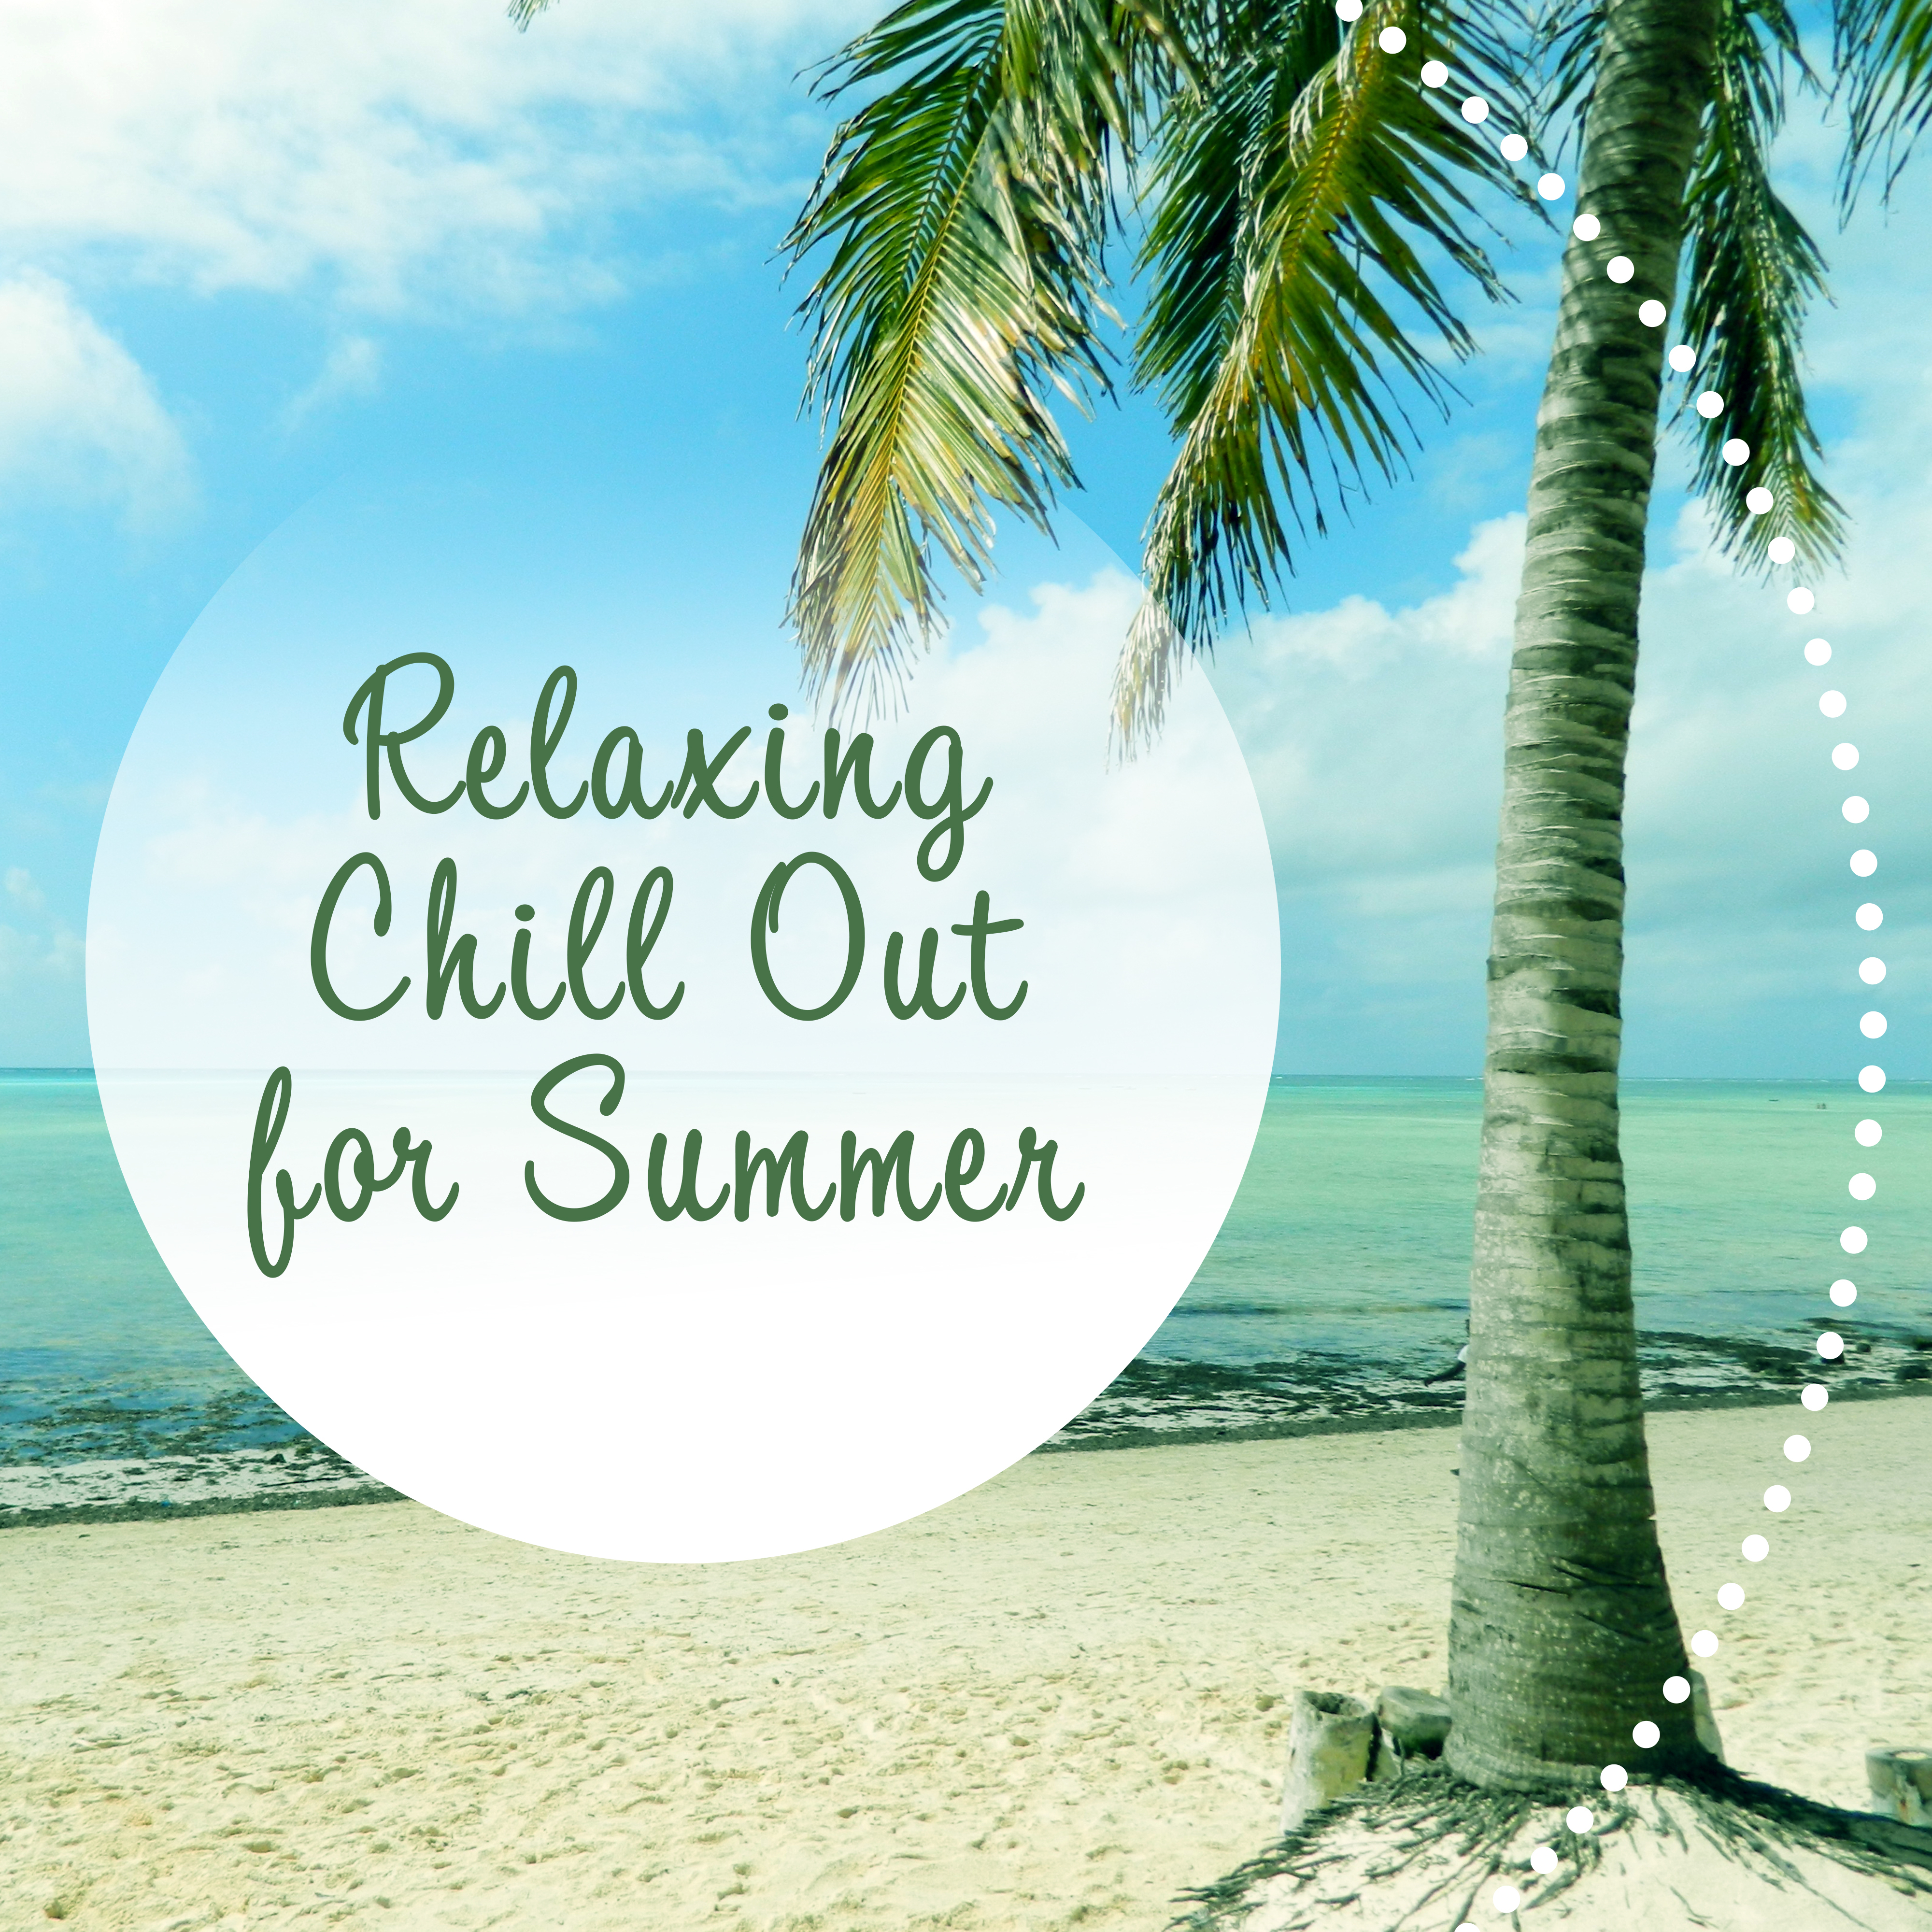 Relaxing Chill Out for Summer – Summer Sounds to Relax, Chill Music, Beach Cocktails